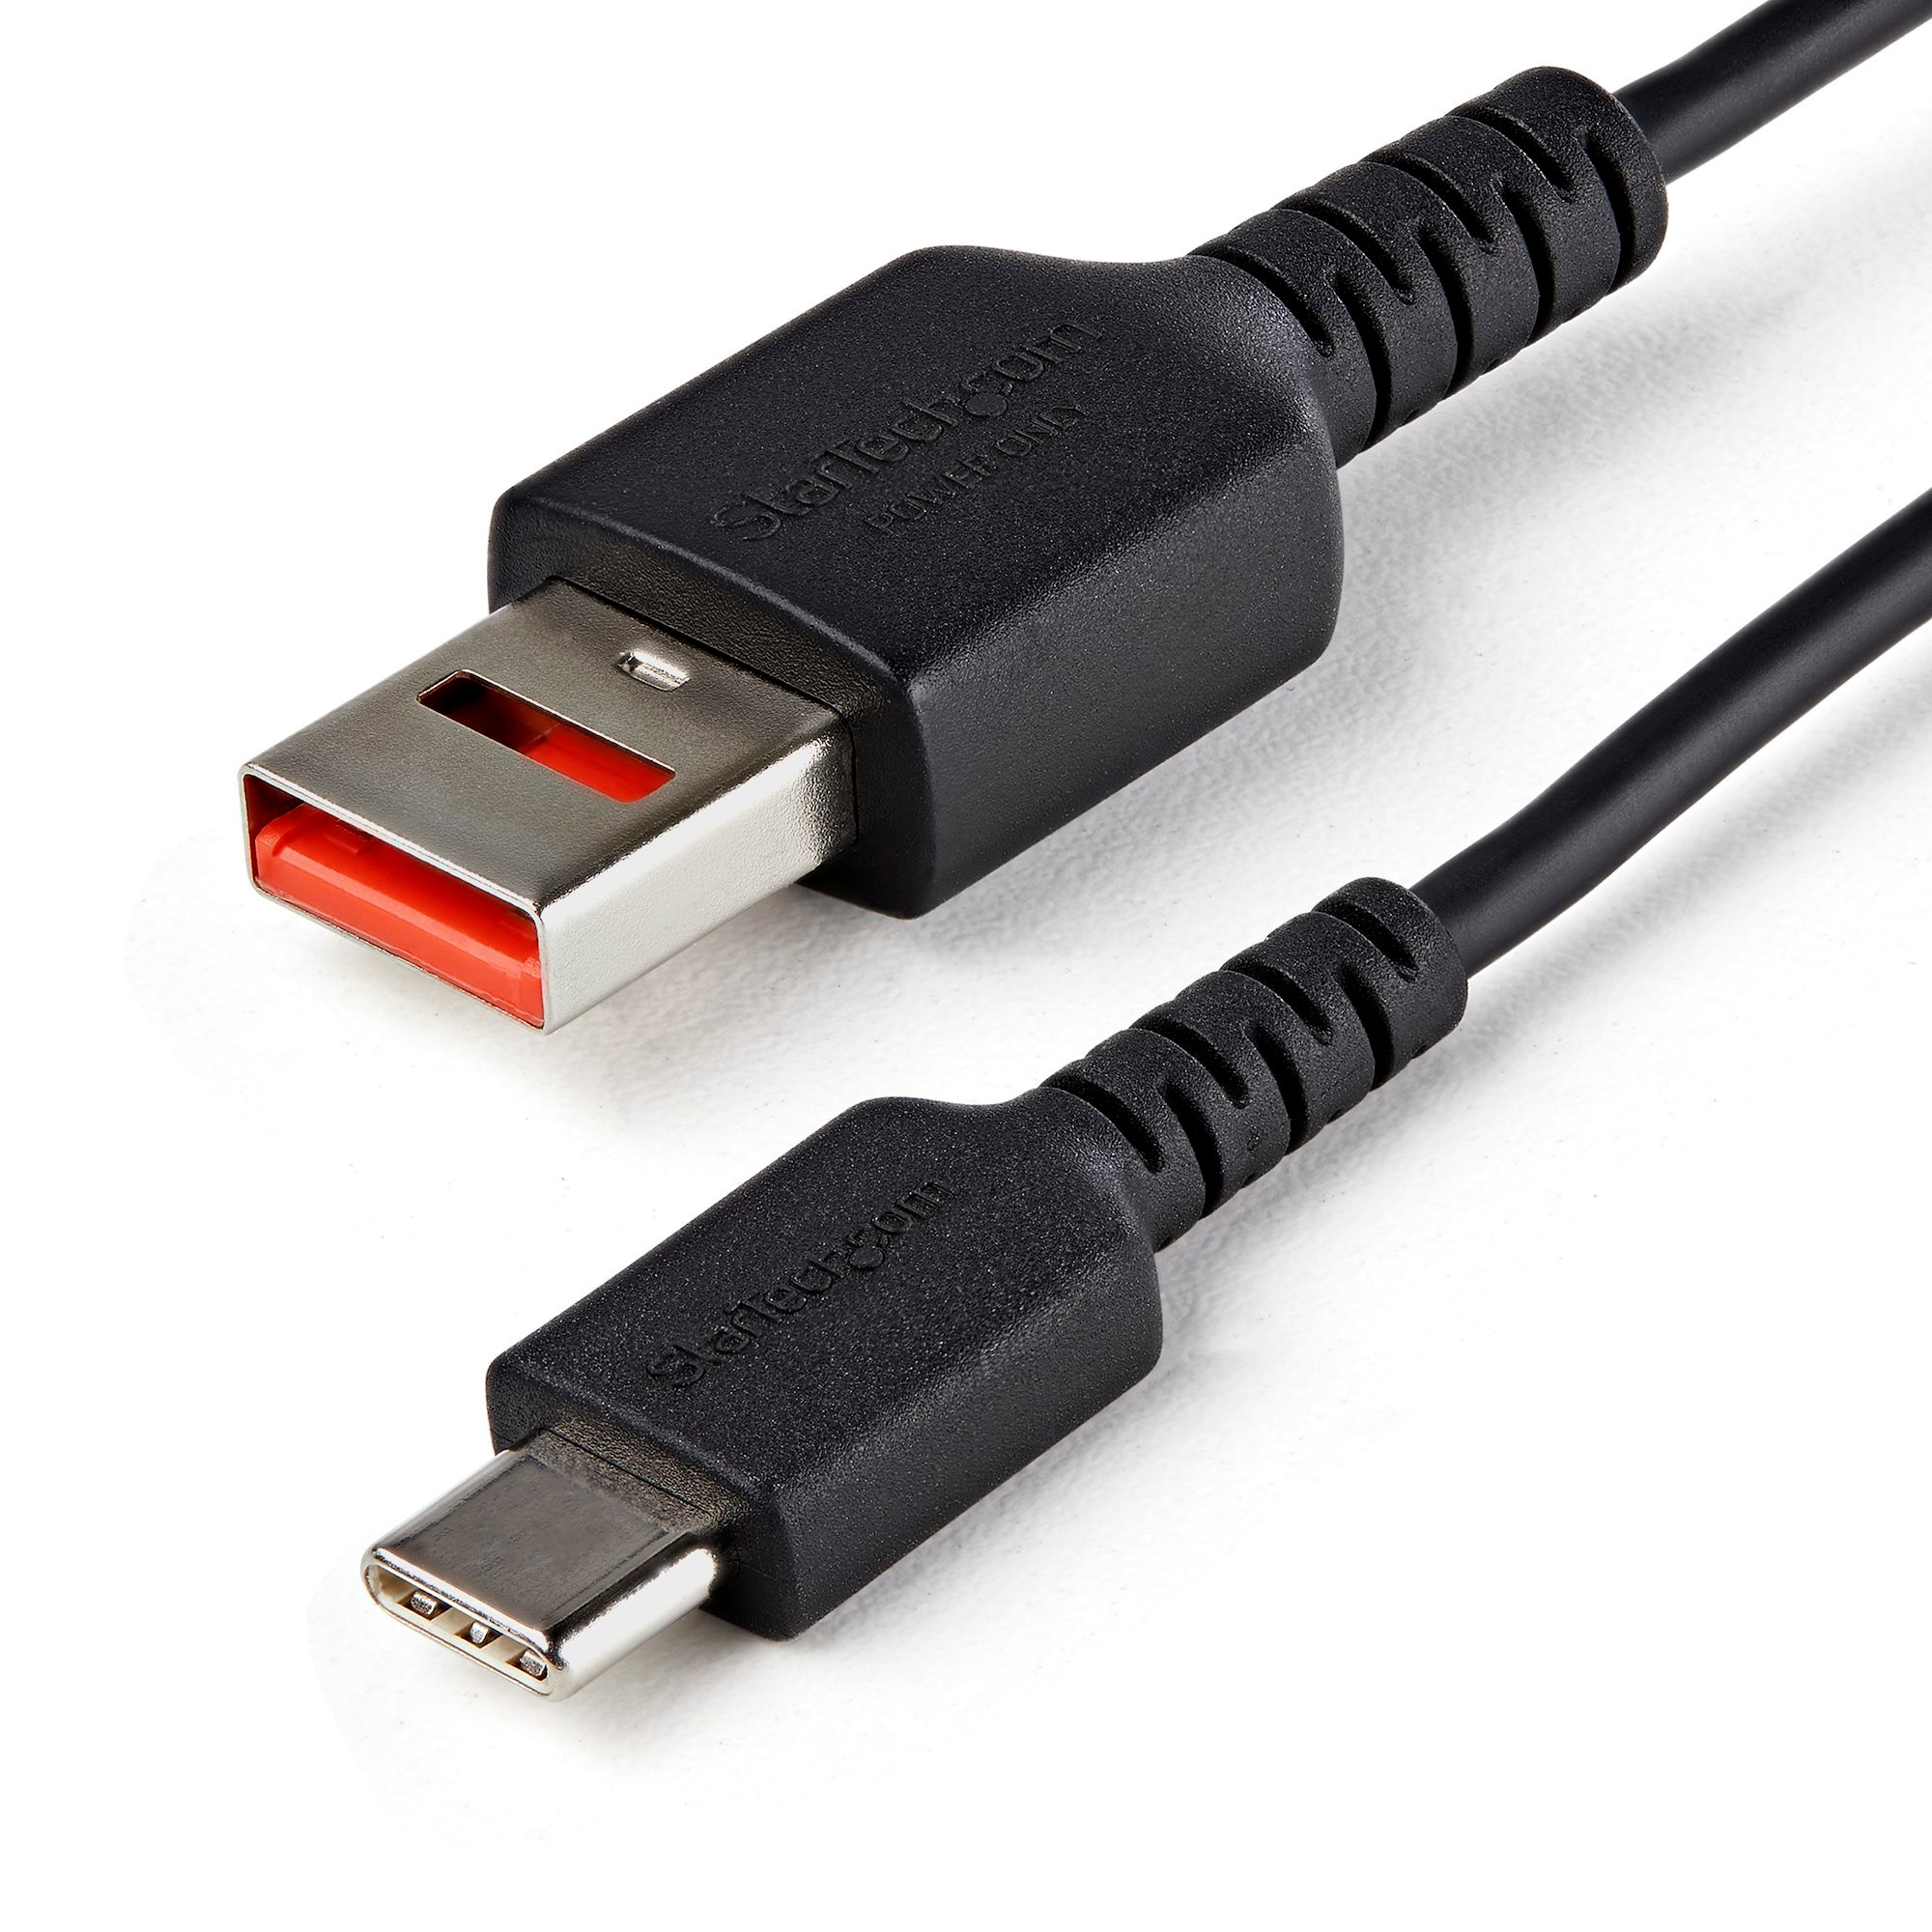 1m (3.3ft) USB-A to USB-C Charging Cable, Charge & Sync, USB 5Gbps, USB A  to USB C Data Cord, M/M, Black